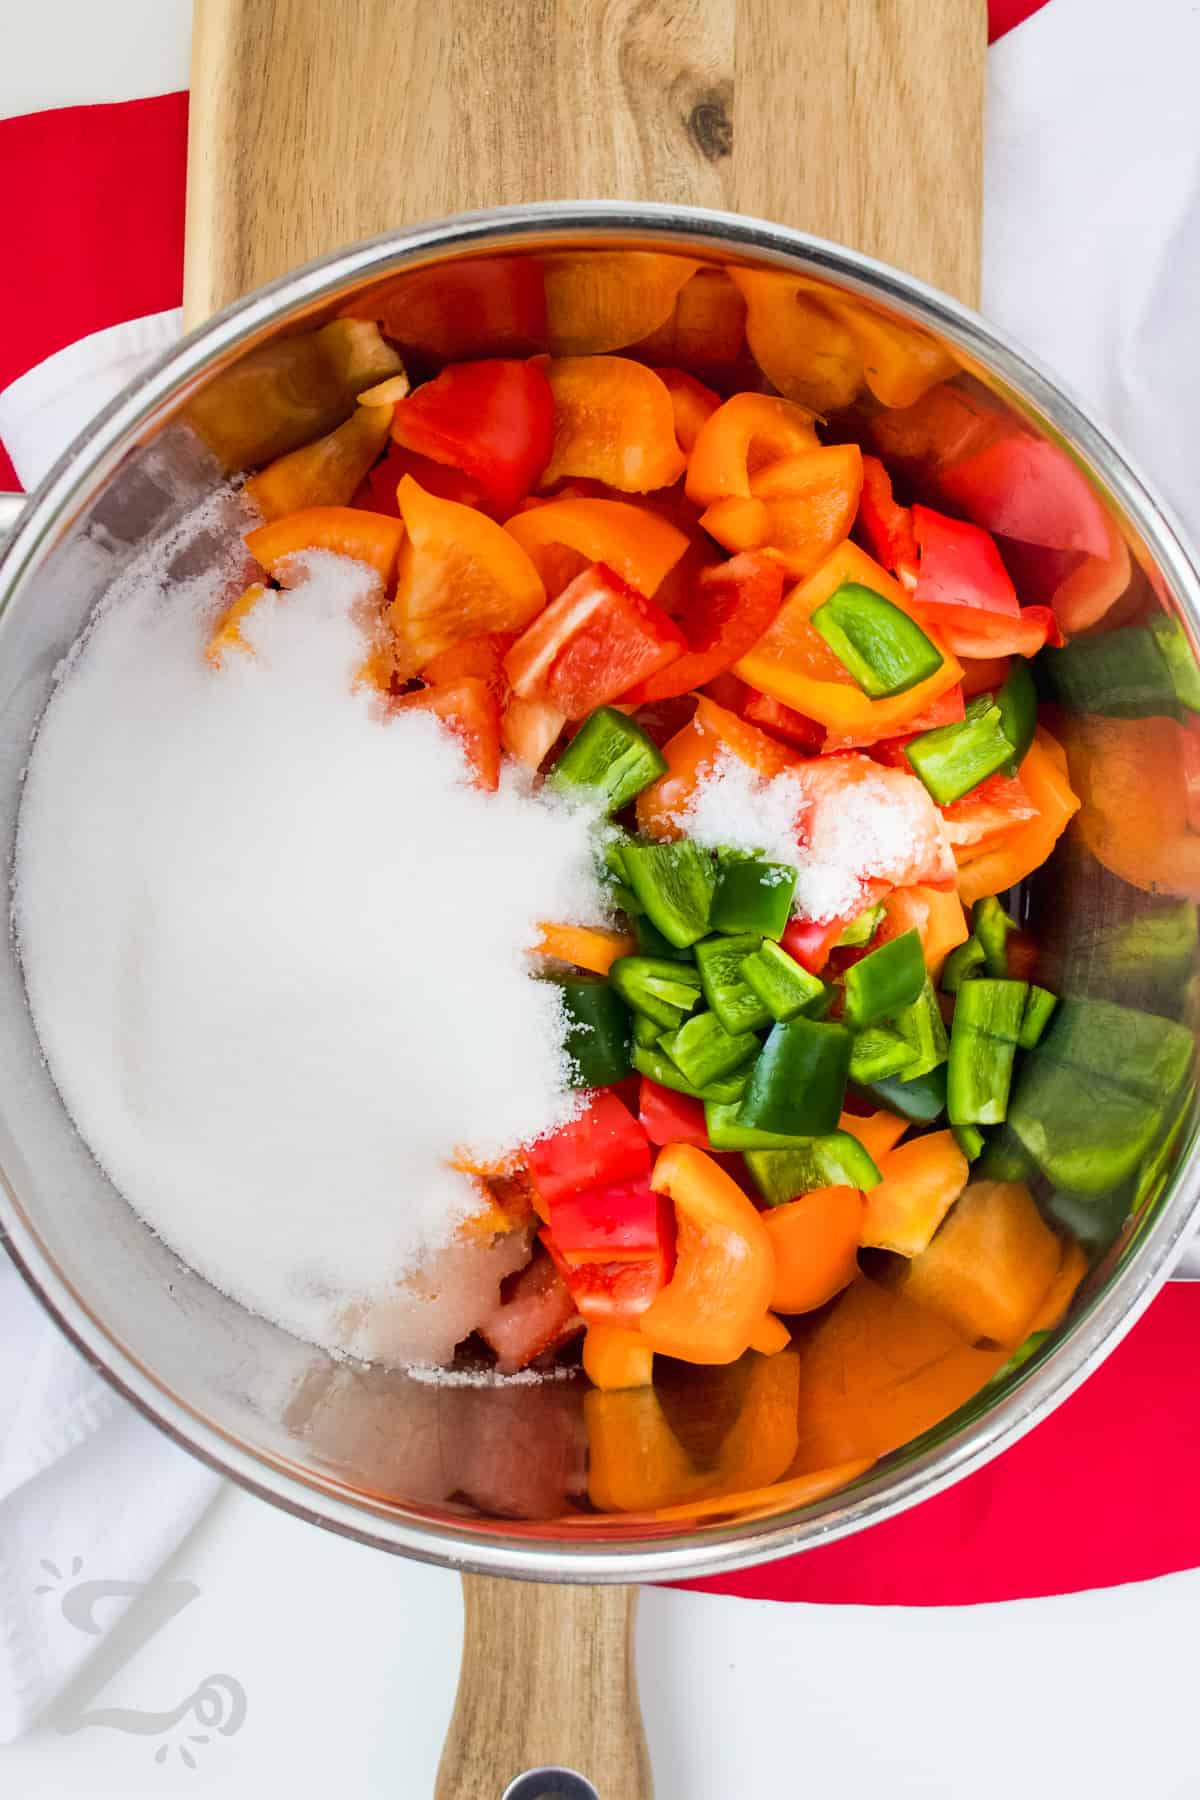 ingredients to make red pepper jelly in a pot